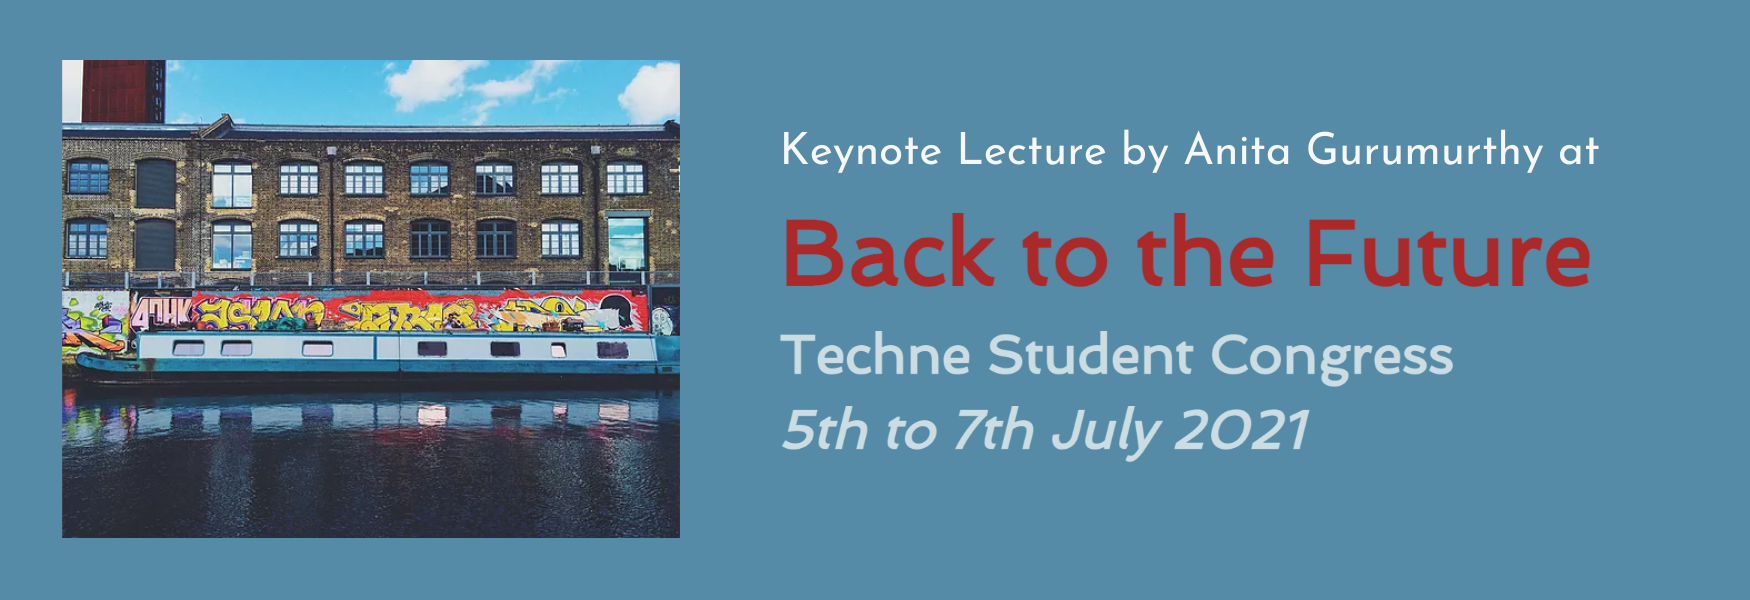 Keynote Lecture at Back to the Future: Techne Student Congress